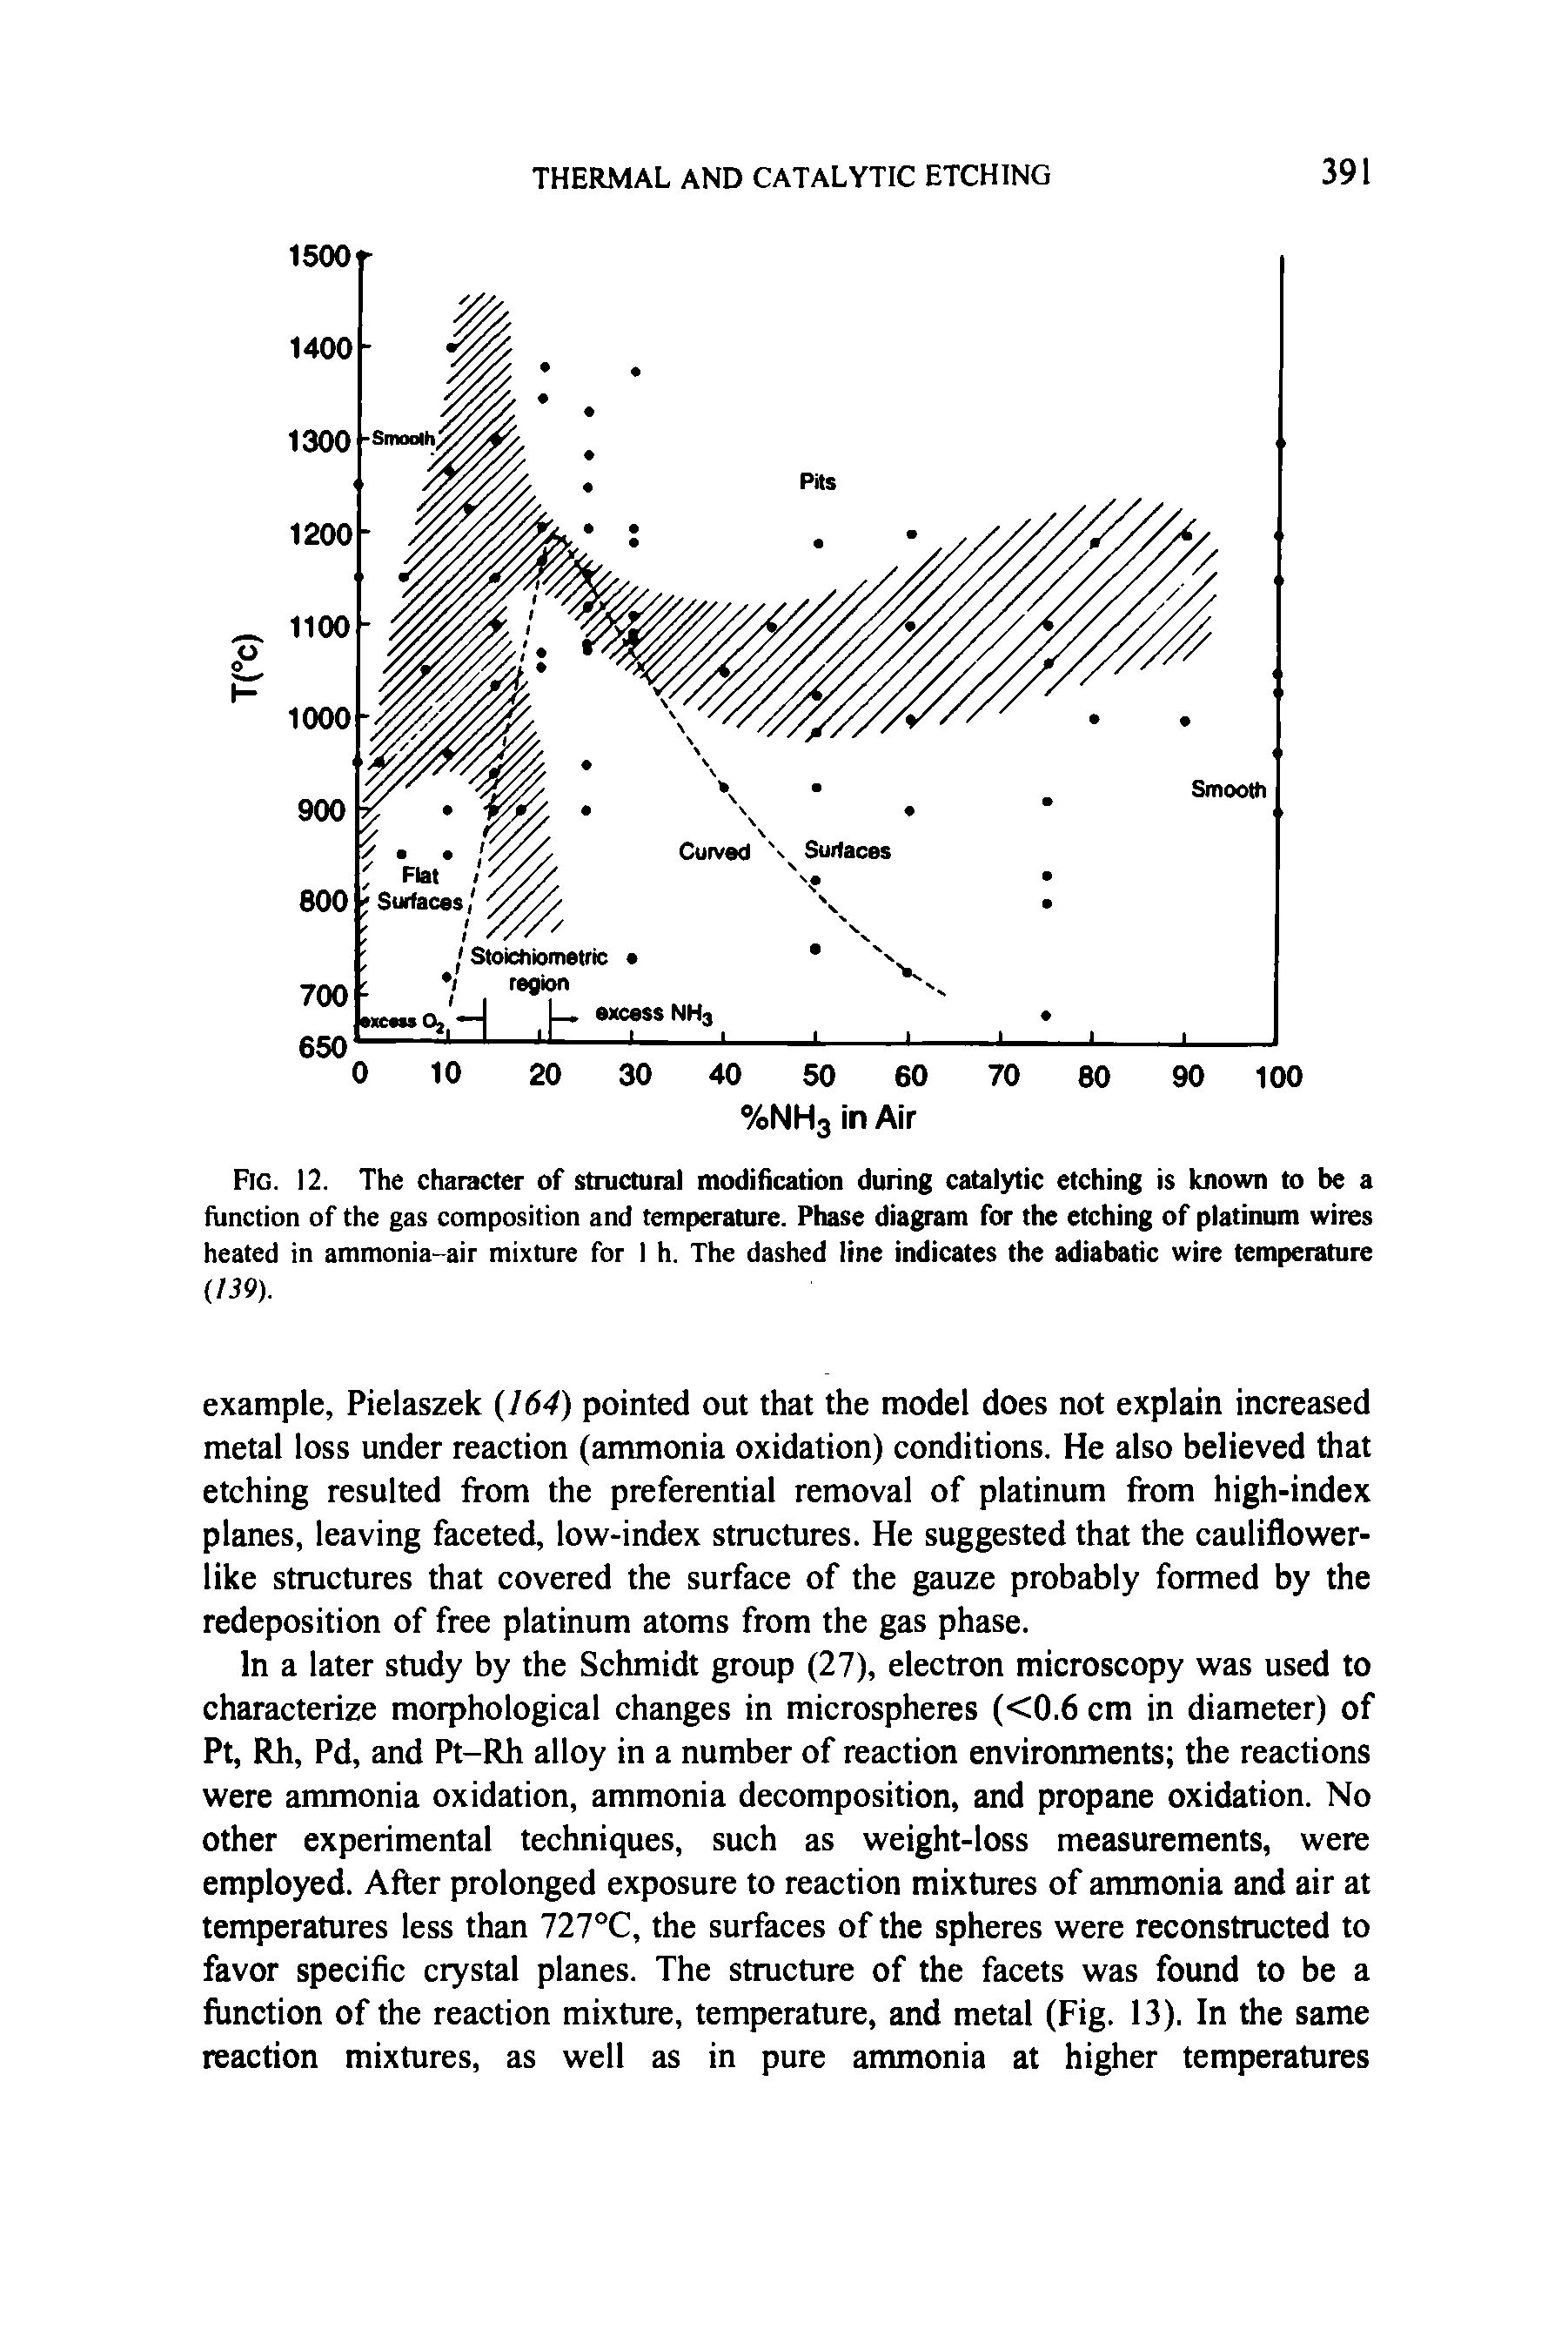 Fig. 12. The character of structural modification during catalytic etching is known to be a function of the gas composition and temperature. Phase diagram for the etching of platinum wires heated in ammonia-air mixture for I h. The dashed line indicates the adiabatic wire temperature...